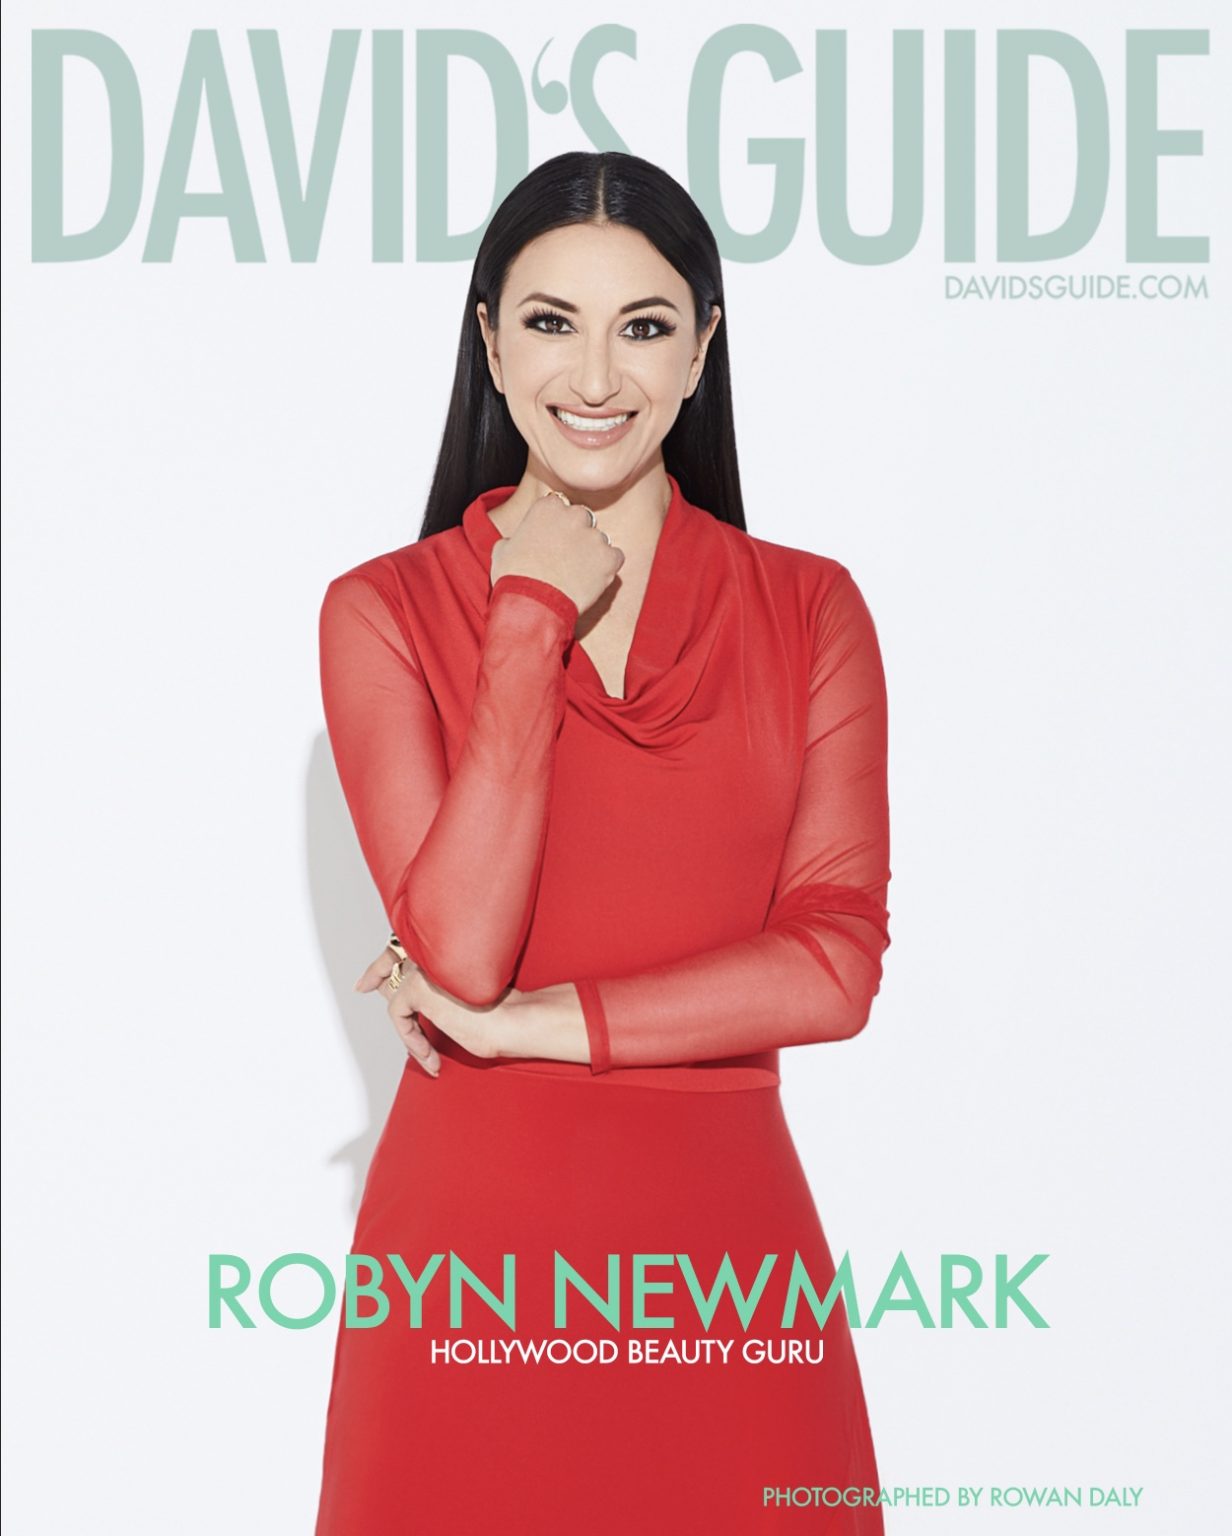 David's Guide Robyn Newmark Cover